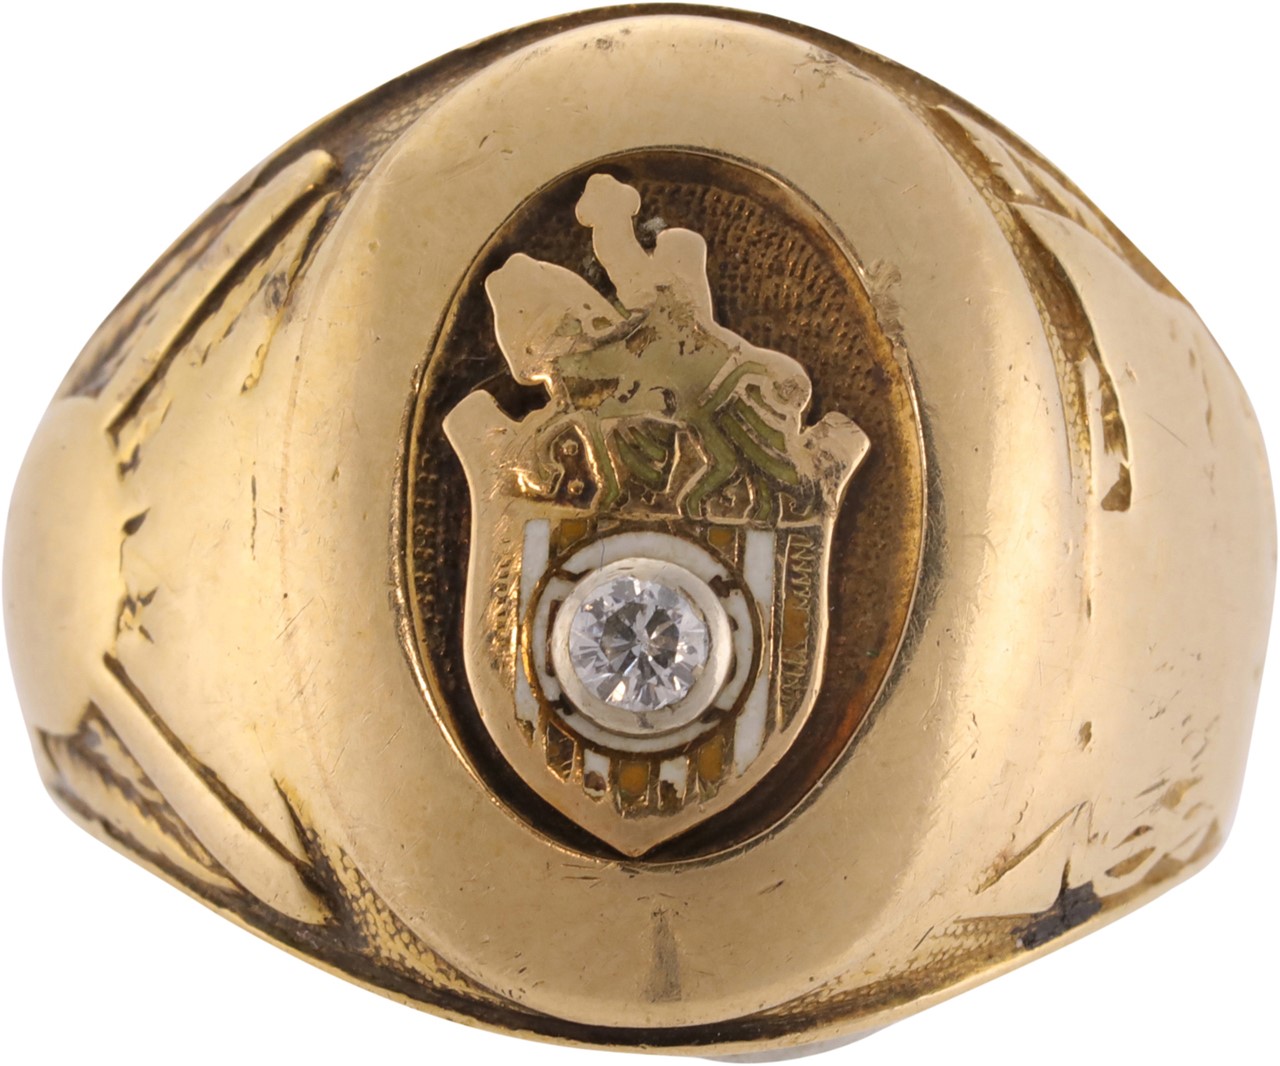 - 1944 St. Louis Browns American League Championship Ring Presented to Outfielder Gene Moore (Family Provenance)